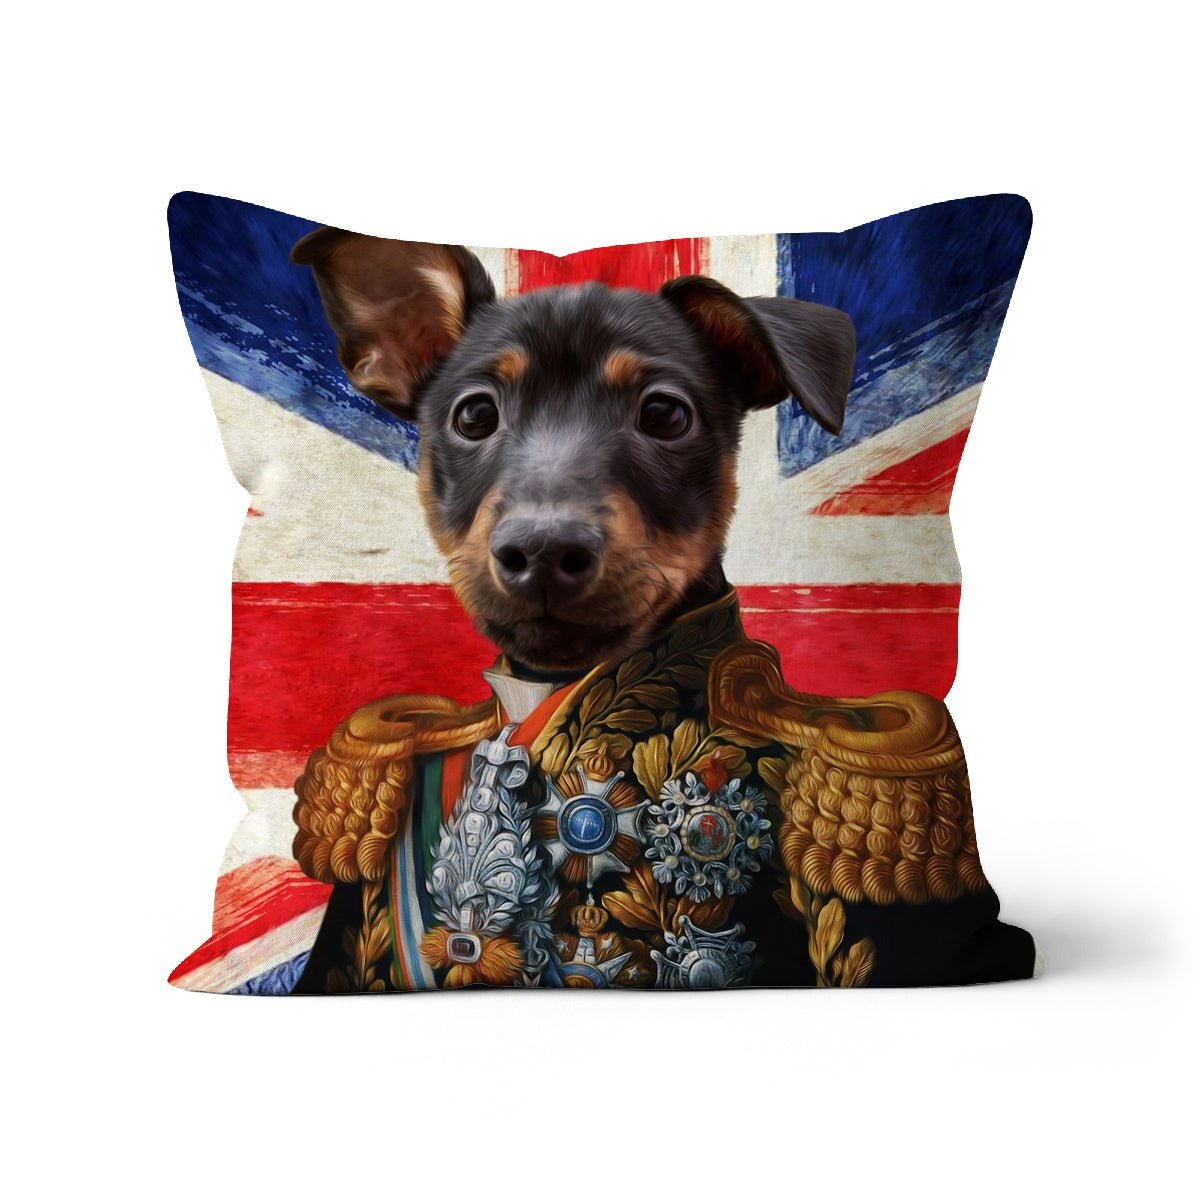 The First Lieutenant British Flag Edition: Custom Pet Cushion - Paw & Glory - #pet portraits# - #dog portraits# - #pet portraits uk#paw & glory, custom pet portrait pillow,personalised cat pillow, dog shaped pillows, custom pillow cover, pillows with dogs picture, my pet pillow